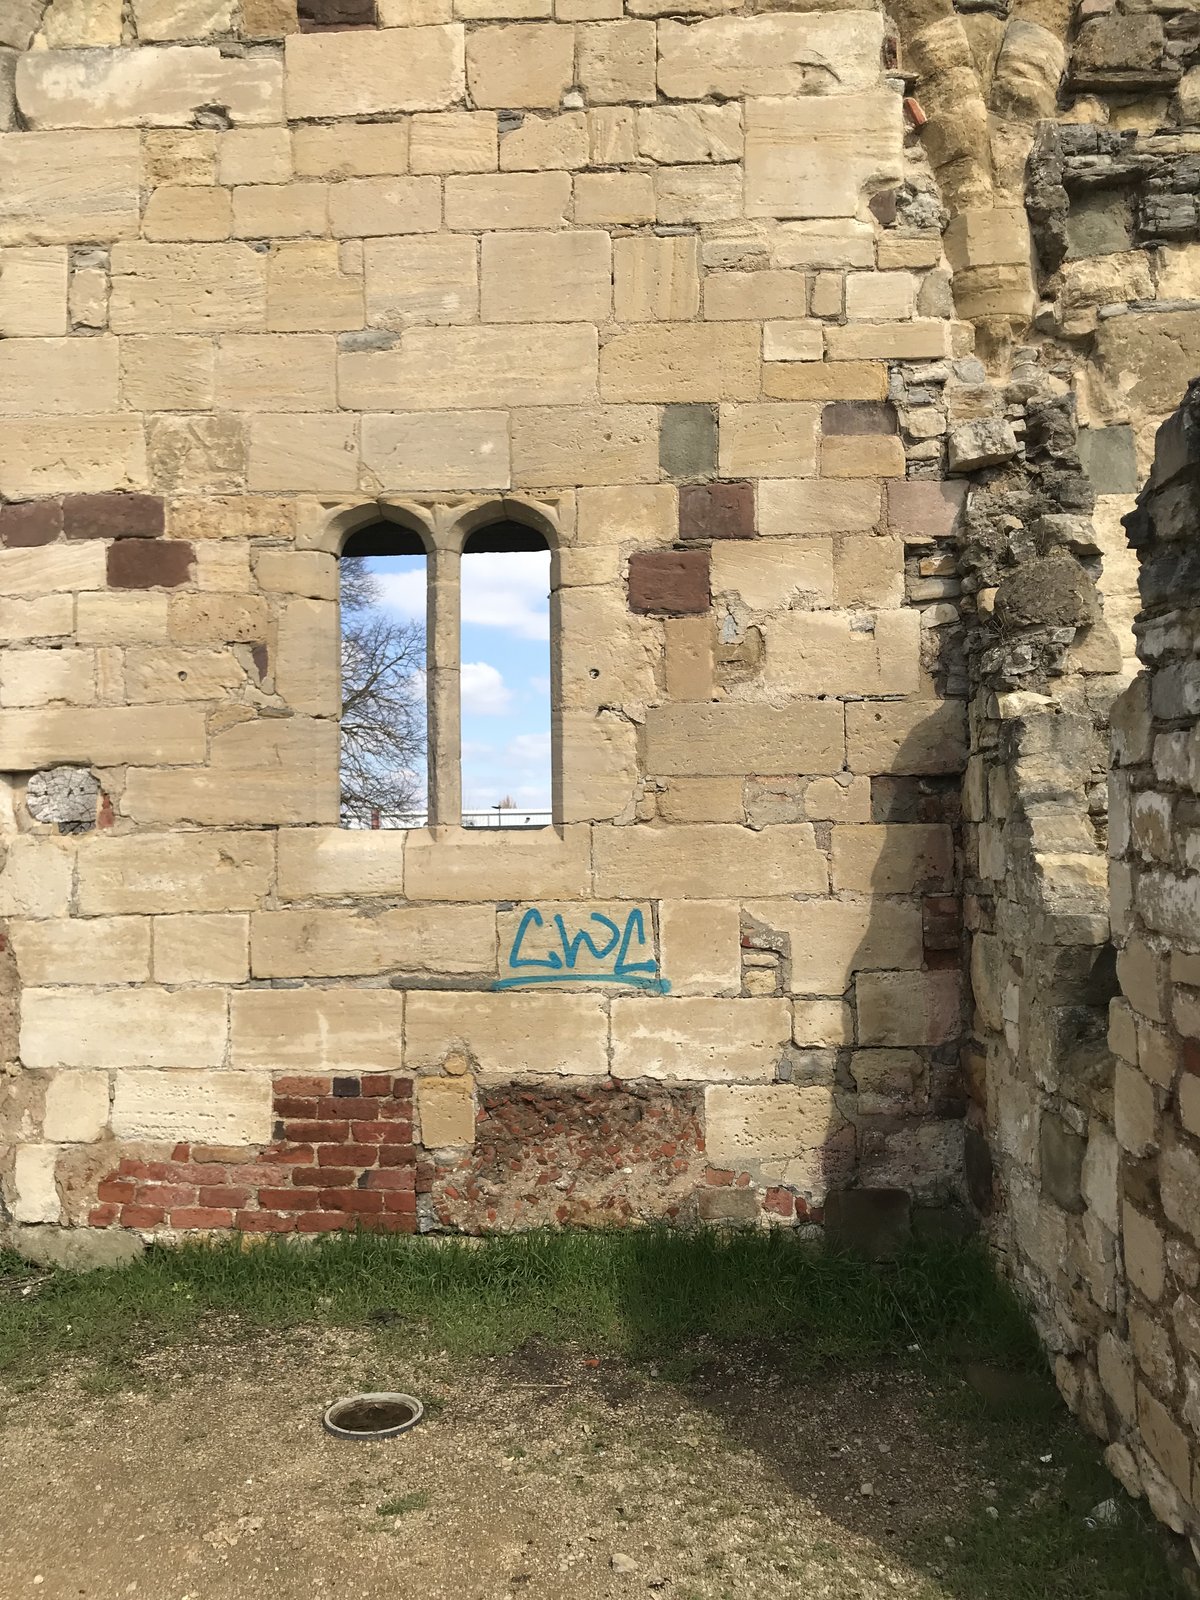 An image of cadw historic site sandblasting graffiti removal before 001 goes here.